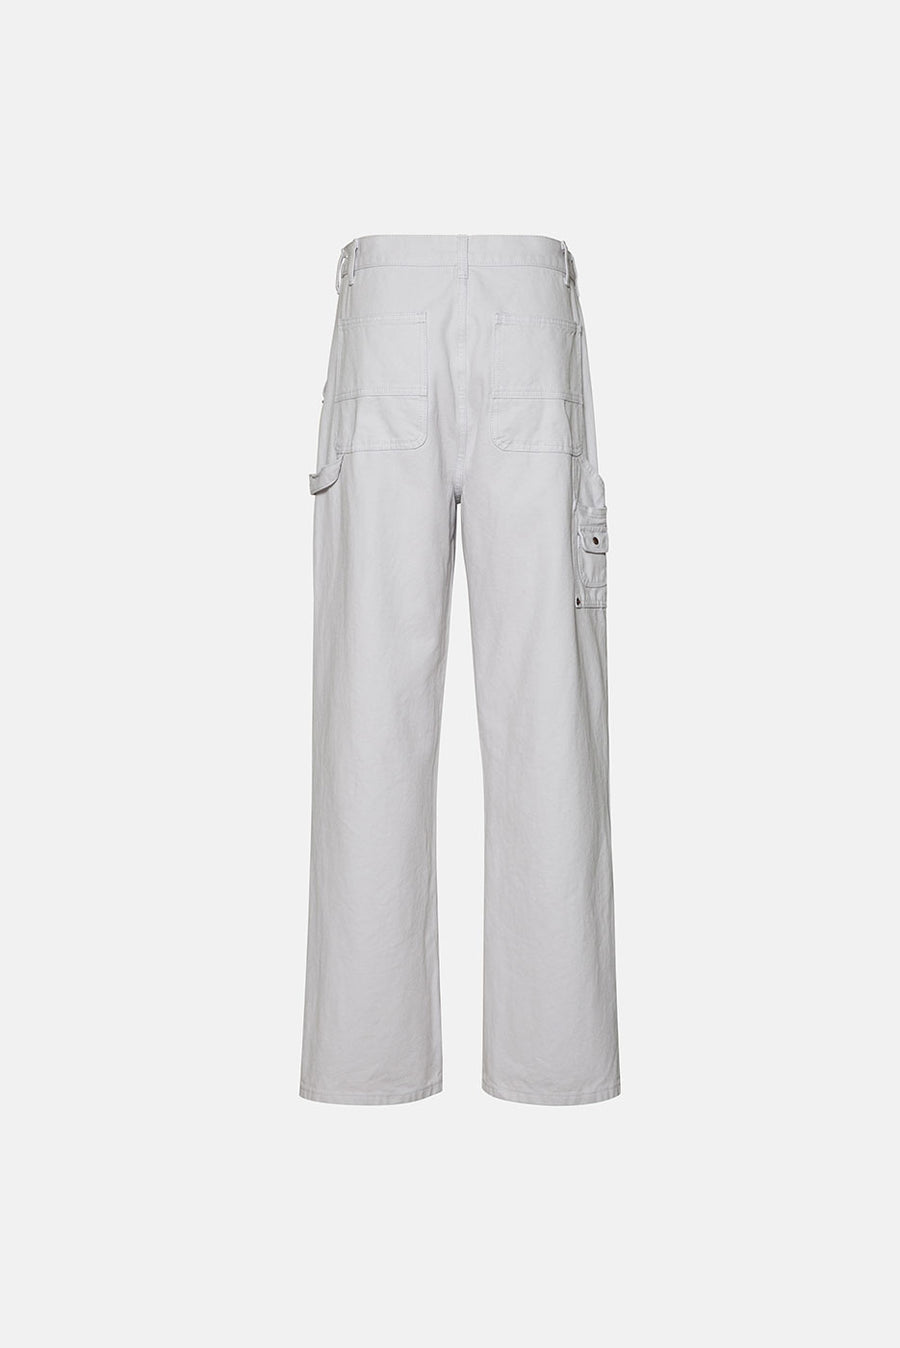 INDUSTRY PANT